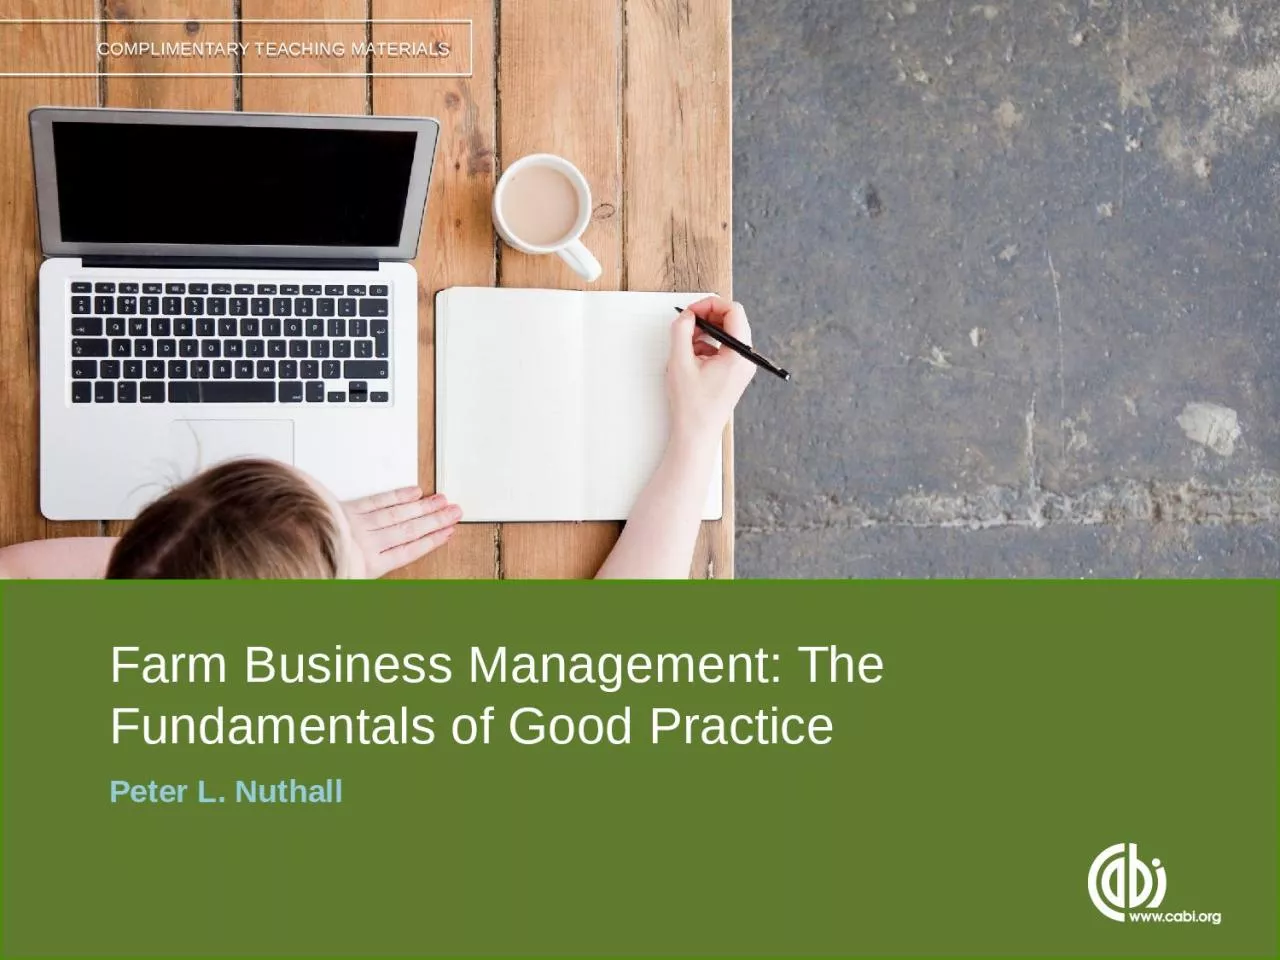 Farm Business Management: The Fundamentals of Good Practice